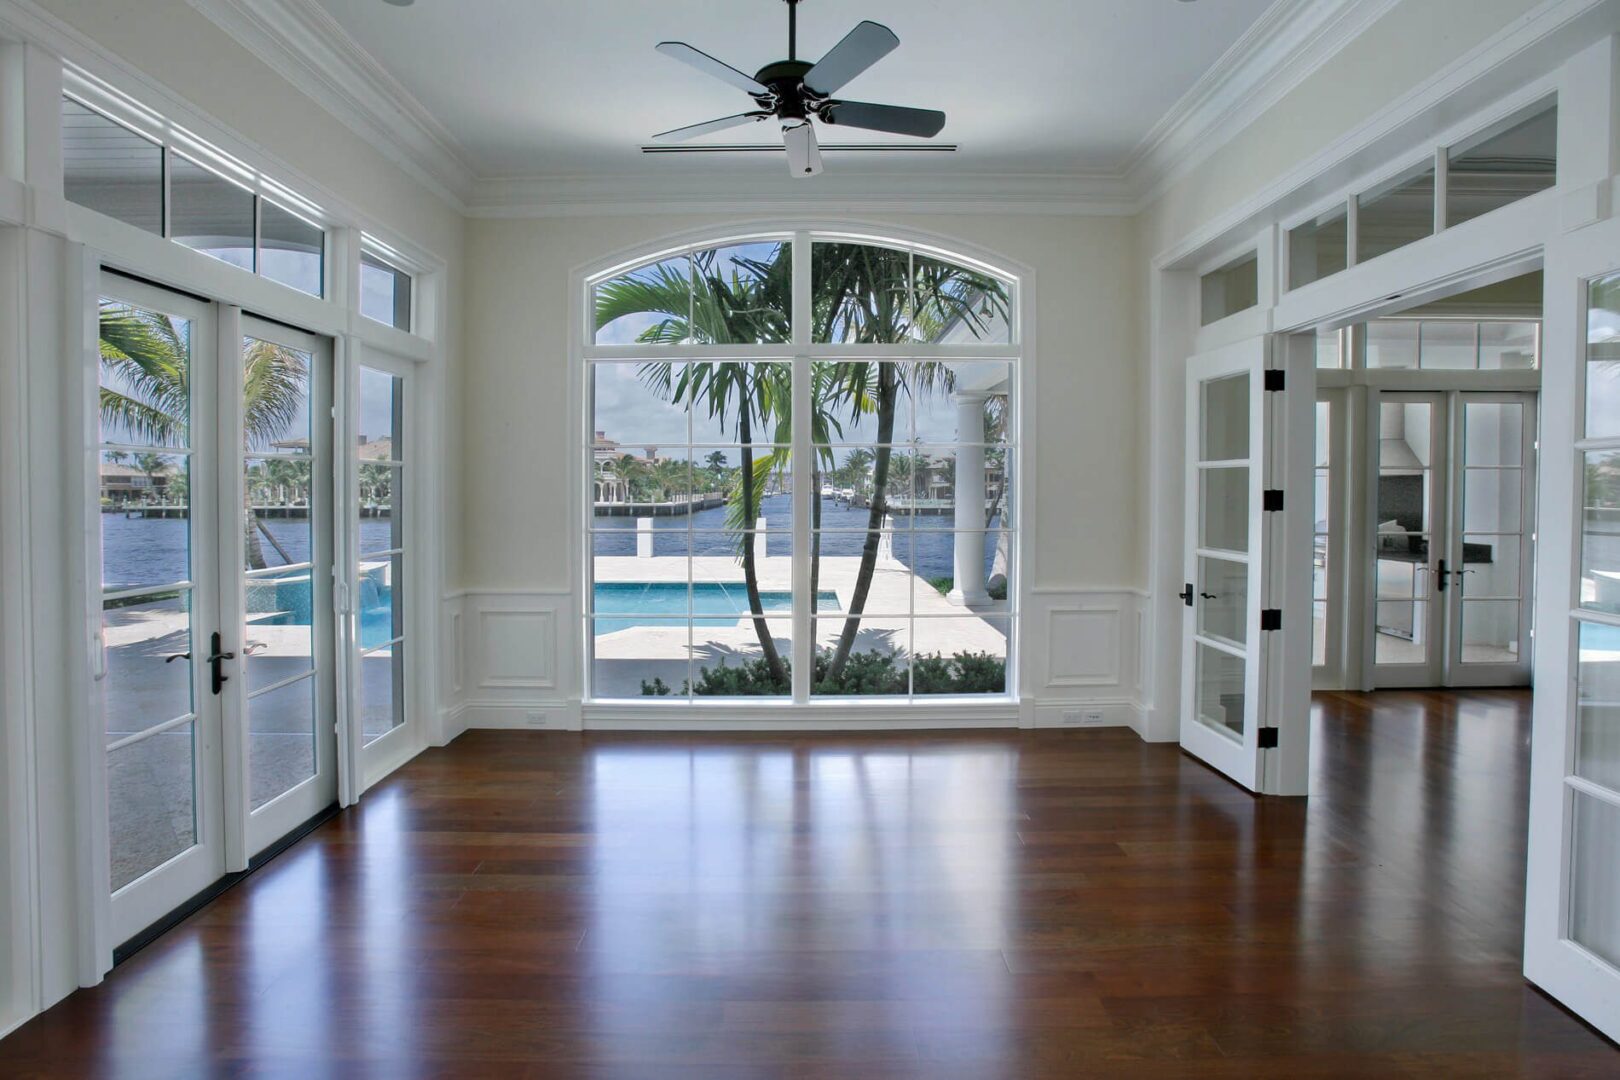 A room with a large window and a pool in the background.